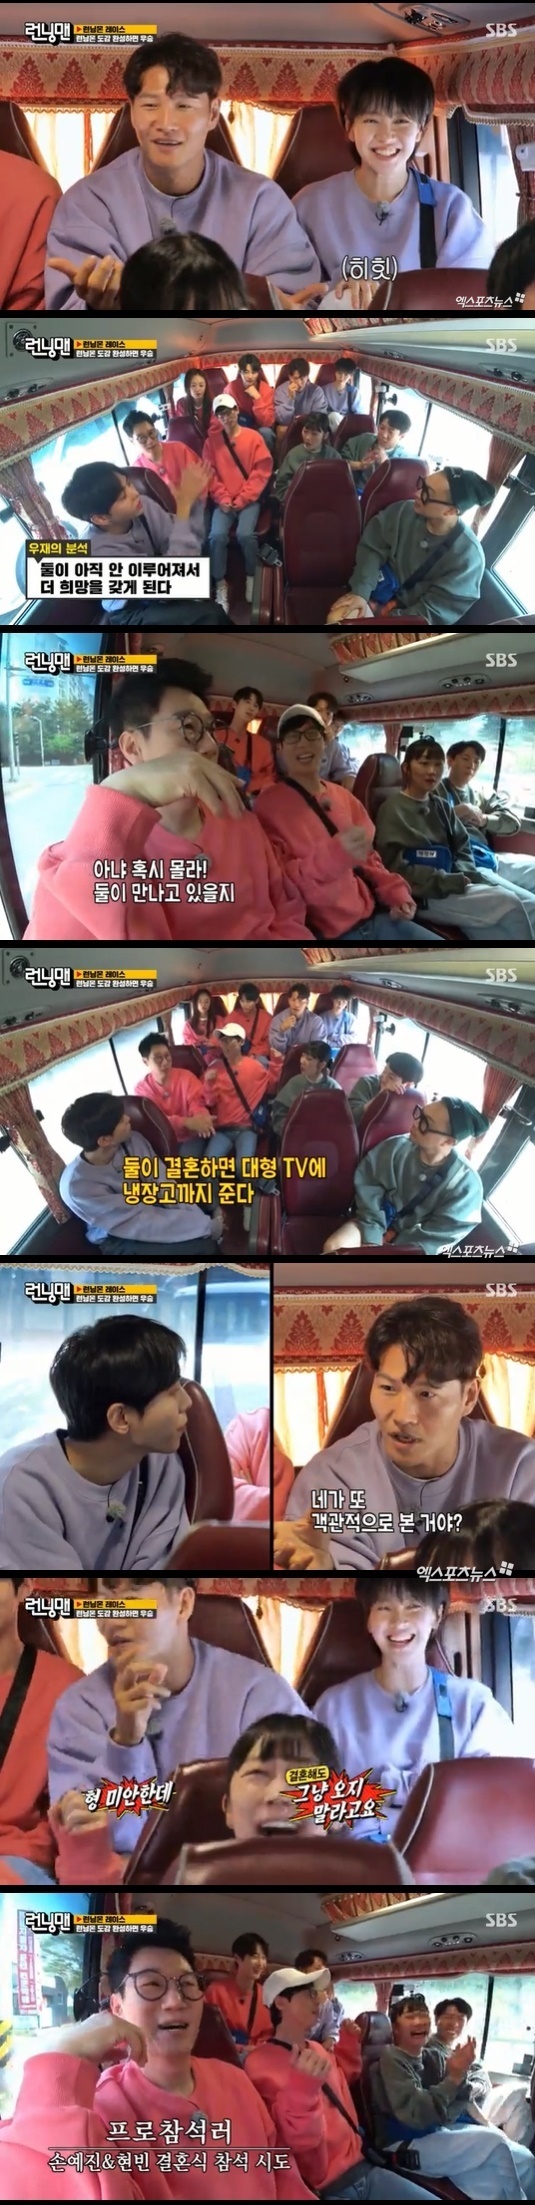 Ji Suk-jin made a big commitment as he hoped that Running Man Kim Jong-kook and Song Ji-hyo could actually be achieved.On SBS Running Man broadcasted on the 1st, it was decorated with Running Mon Race where Joo Woo Jae, Wooseok and Park Kyung Hye appeared as guests.Yoo Jae-Suk asked Wooseok for MBTI, Wooseok replied, ESFJ; Ju Woo-jae said, Im ISTP; youre ISTJ, right?I wondered about Kim Jong-kooks MBTI.Kim Jong-kook replied, I dont know, but I did it once and it came out just like this brother (Yoo Jae-Suk); Song Ji-hyo, who was next to him, said, No.It came out just like me, he said, correcting himself as INFJ.Yoo Jae-Suk tapped Kim Jong-kook, saying, Get on with your finger, Song Ji-hyo said, Be careful, brother, do I have to memorize this?He showed a taste in the couples contest.Im a fan of this line, and theres actually a possibility that many people (have hope) have content that it hasnt been done yet, Ju said, speaking out.Kim Jong-kook said, Did you see it objectively again? Haha said, My brother especially craved a goodwill.Kim Jong-kook quipped, saying, I think of a long child. I like children.Its better not to think that the end and Jihyo are connected, Yoo Jae-Suk said, but Ji Suk-jin said, I dont know, if theyre meeting.When they get married, they put a refrigerator on a large TV. Kim Jong-kook threw a stone fastball, saying, Im sorry, brother, but dont come (wedding) if you want to. Haha laughed, I dont have to invite this brother again.Then, the caption Son Ye-jin attempts to attend Hyun Bins wedding was released.Yoo Jae-Suk laughed around, saying, Watchers, do not be surprised if your brother Ji Suk-jin suddenly goes to a house event.And then there was the love line between Jean So-min and Wooseok. Jean So-min expressed a love for Wooseok.Ji Suk-jin asked Wooseok, Is not it popular? Wooseok nailed it, saying, Its not that much more than you think.Ji Suk-jin wondered, saying, I dont like personality. Wooseok was confident, saying, Its pretty good.Jeon So-min laughed forcibly, saying it was so funny, and the members teased that Jeon So-min was overly excited about the side, acting like an exaggerated person.I dont want to look like this, Ju Woo-jae said.Do you like women you feel? asked Juwoojae, who replied, I love them so much. Leon So-min could not hide his joy.Wooseok learned how to open a name tag to Ji Suk-jin, Yo Jae-Suk and Jeon So-min ahead of torn a name tag.Wooseok said he felt pleasure, and Jean So-min confessed, I have never felt it in five years.Wooseok shouted, Ill make you feel it, Ill help you, but the game was out in 1:38 and laughed. Ill be right there.Stay. Gyeong-hye? I will avenge you. I will be rewarded today. Photo: SBS Broadcasting Screen